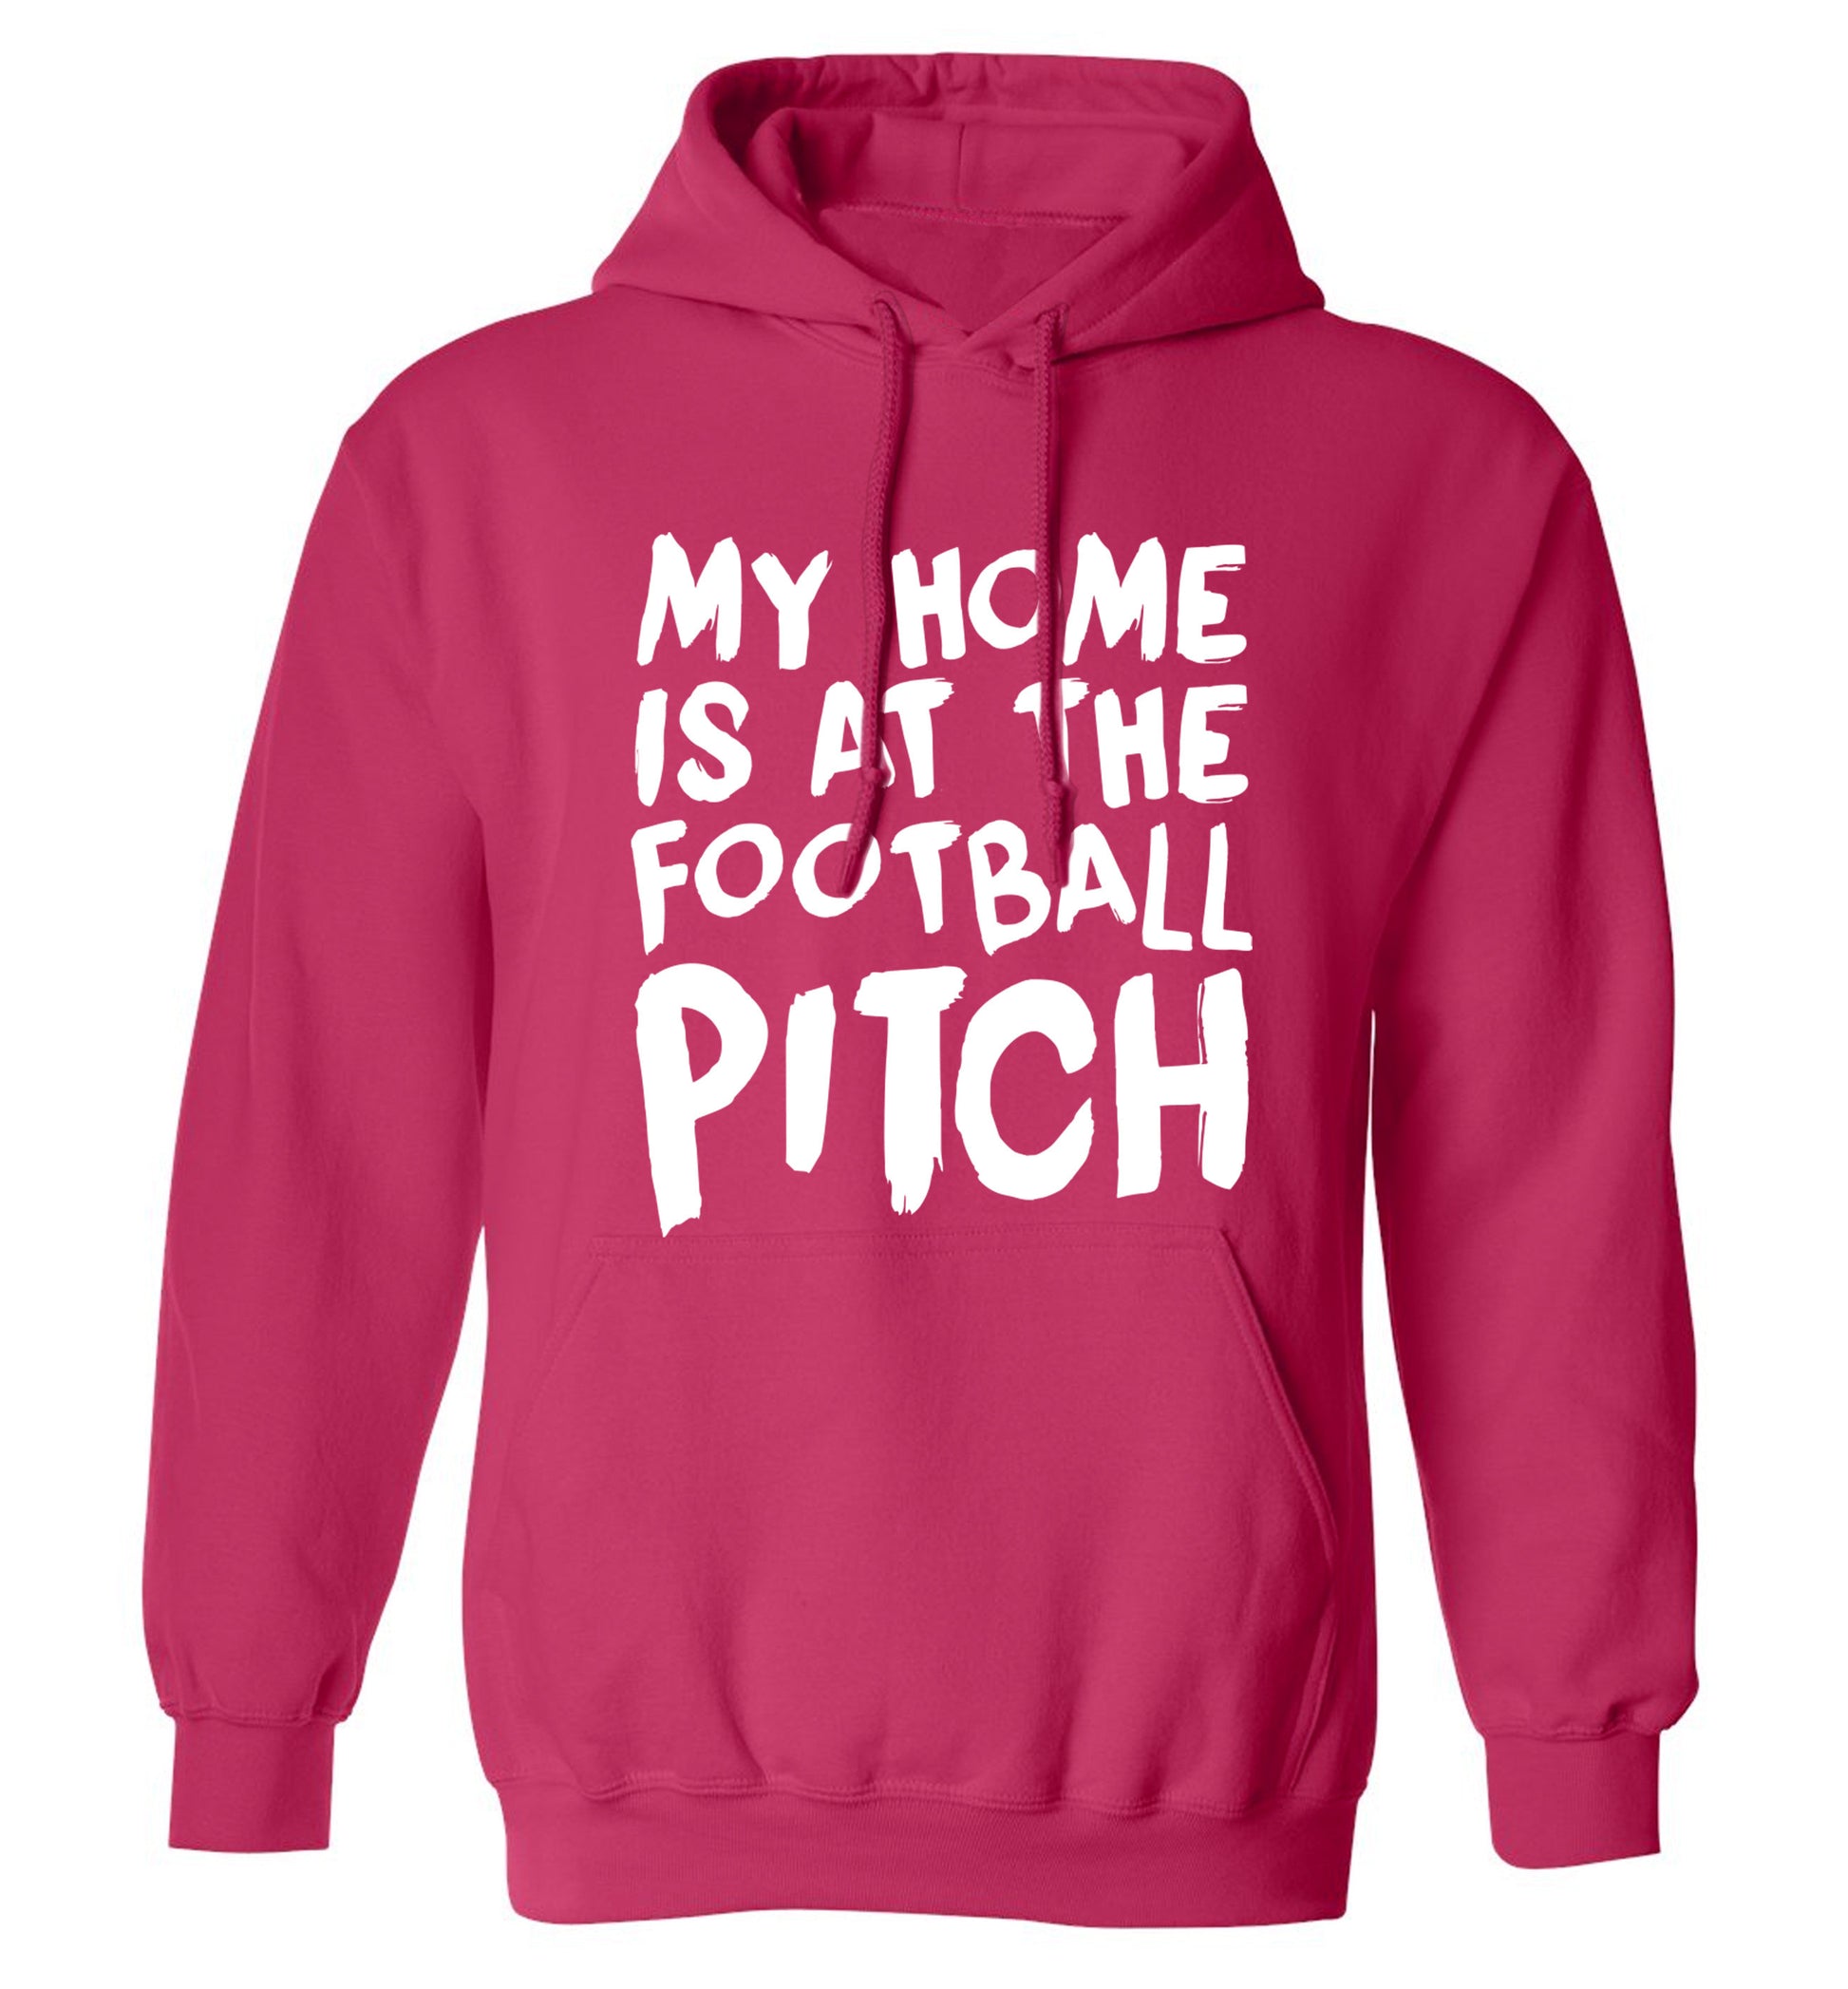 My home is at the football pitch adults unisex pink hoodie 2XL